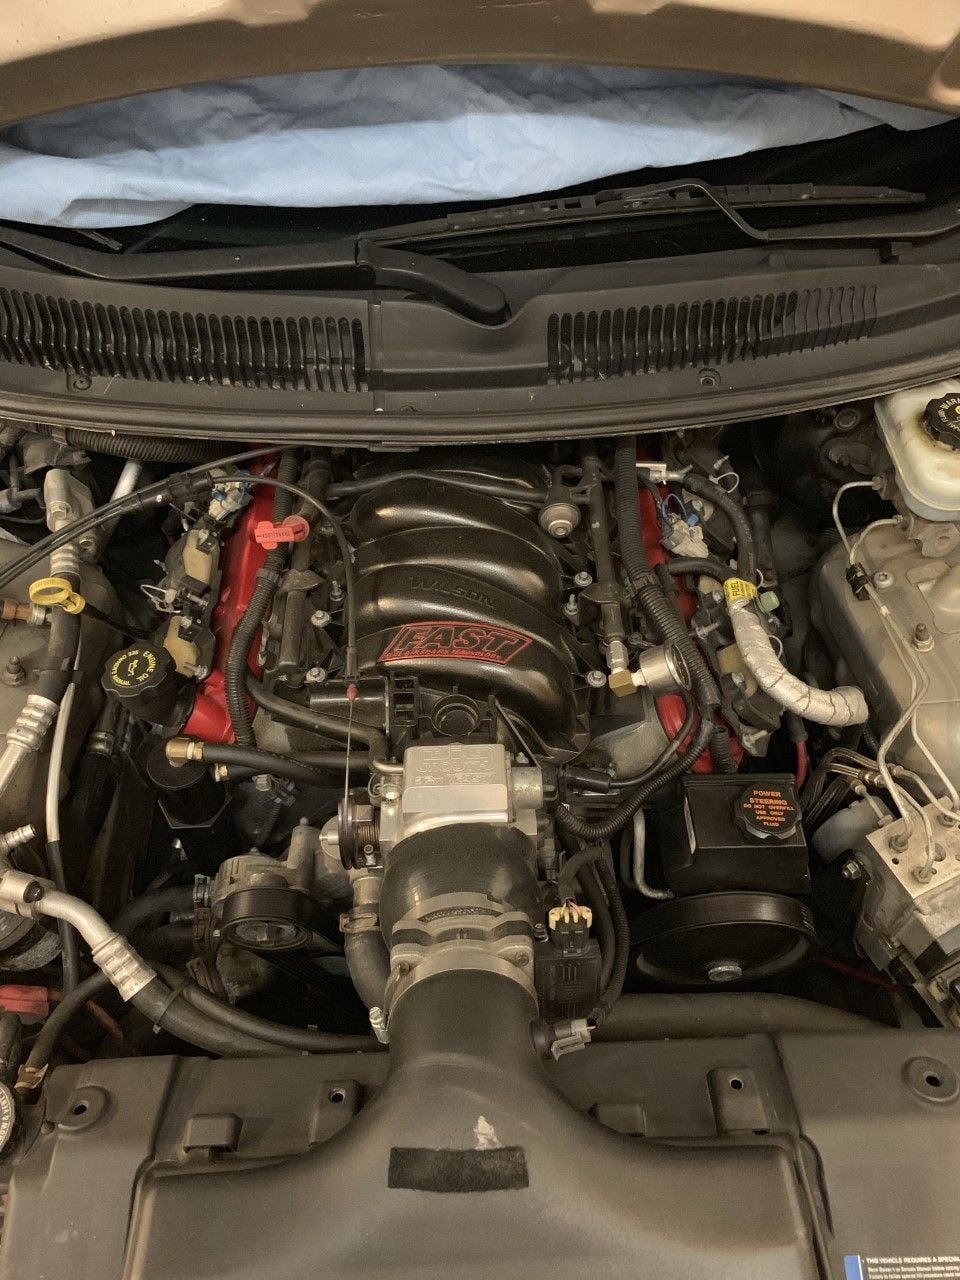  - Fast 90 Intake and Fast 92 Throttle Body - Dayton, OH 45424, United States